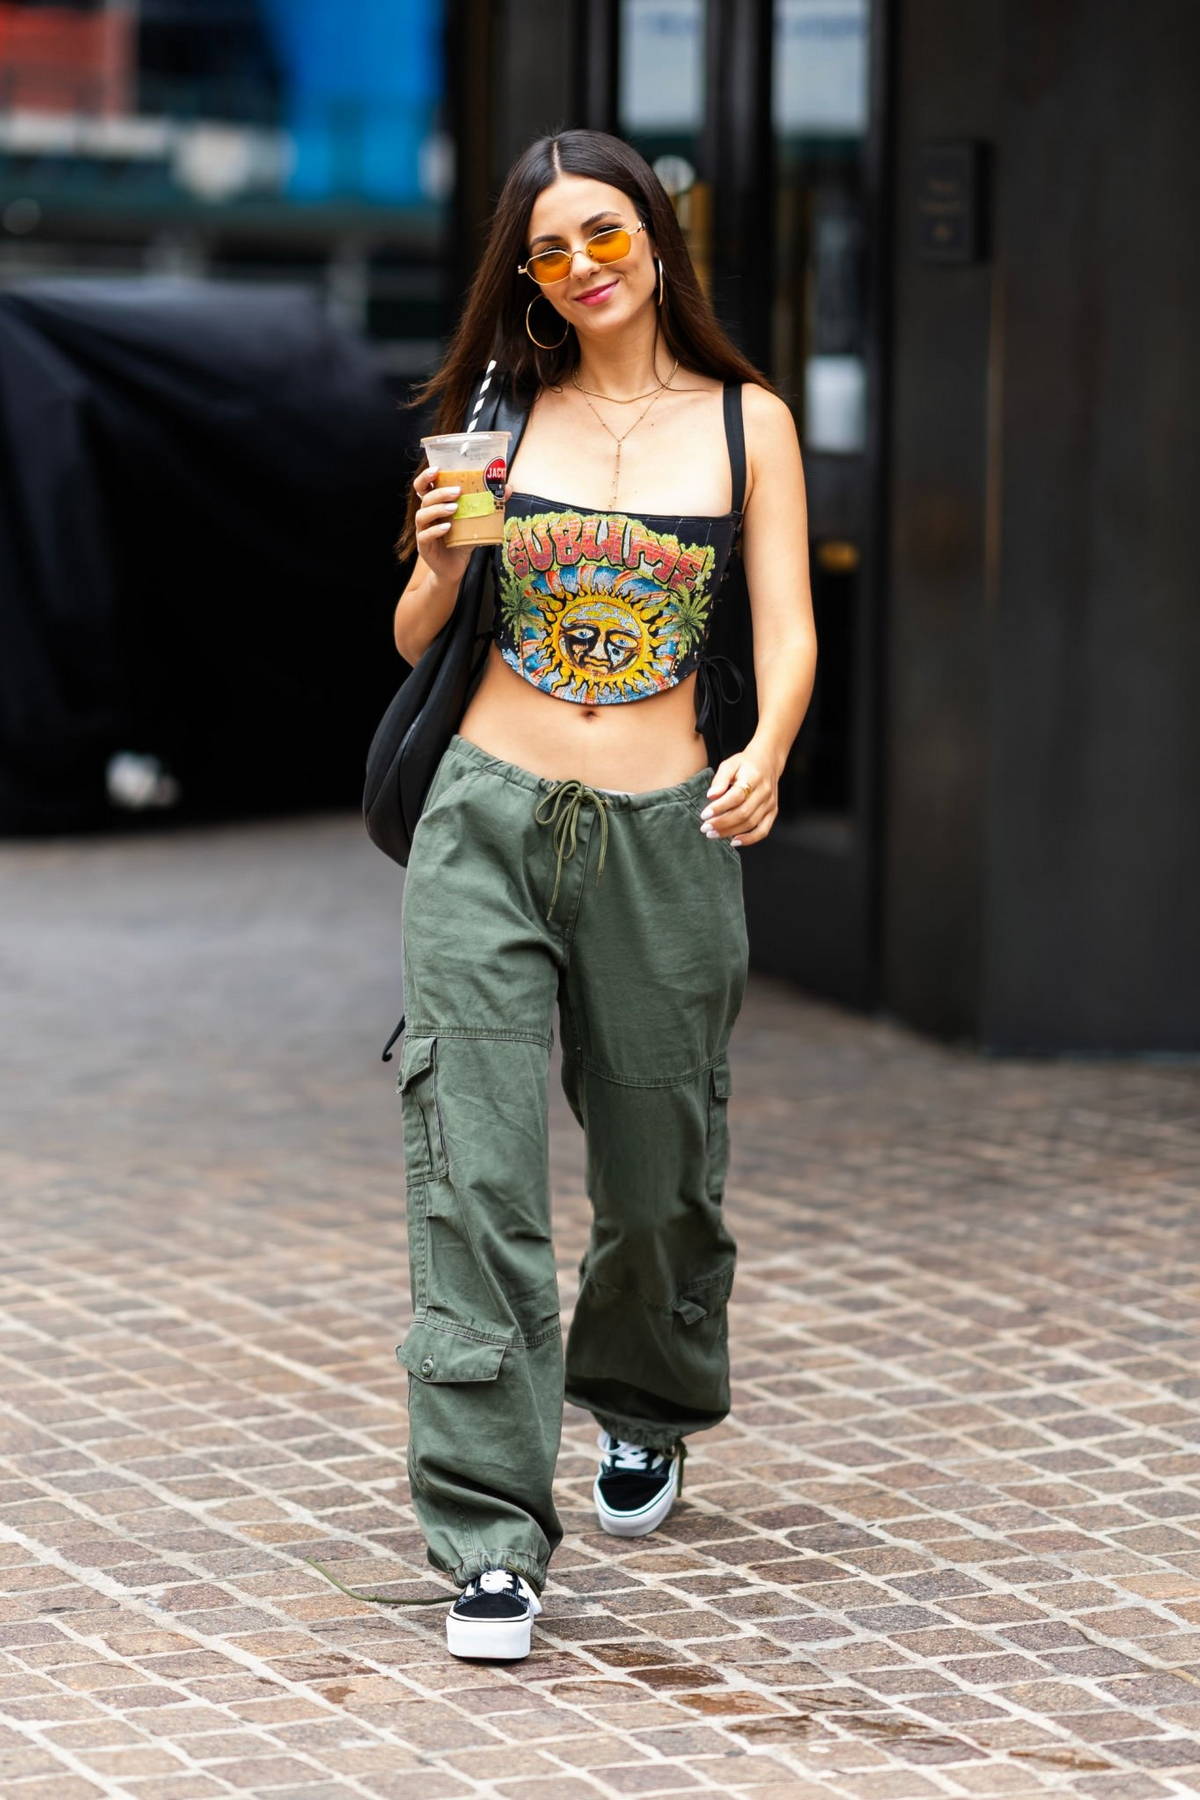 Victoria Justice flashes her toned tummy in a graphic crop top and olive green cargo pants while stepping out in New York City